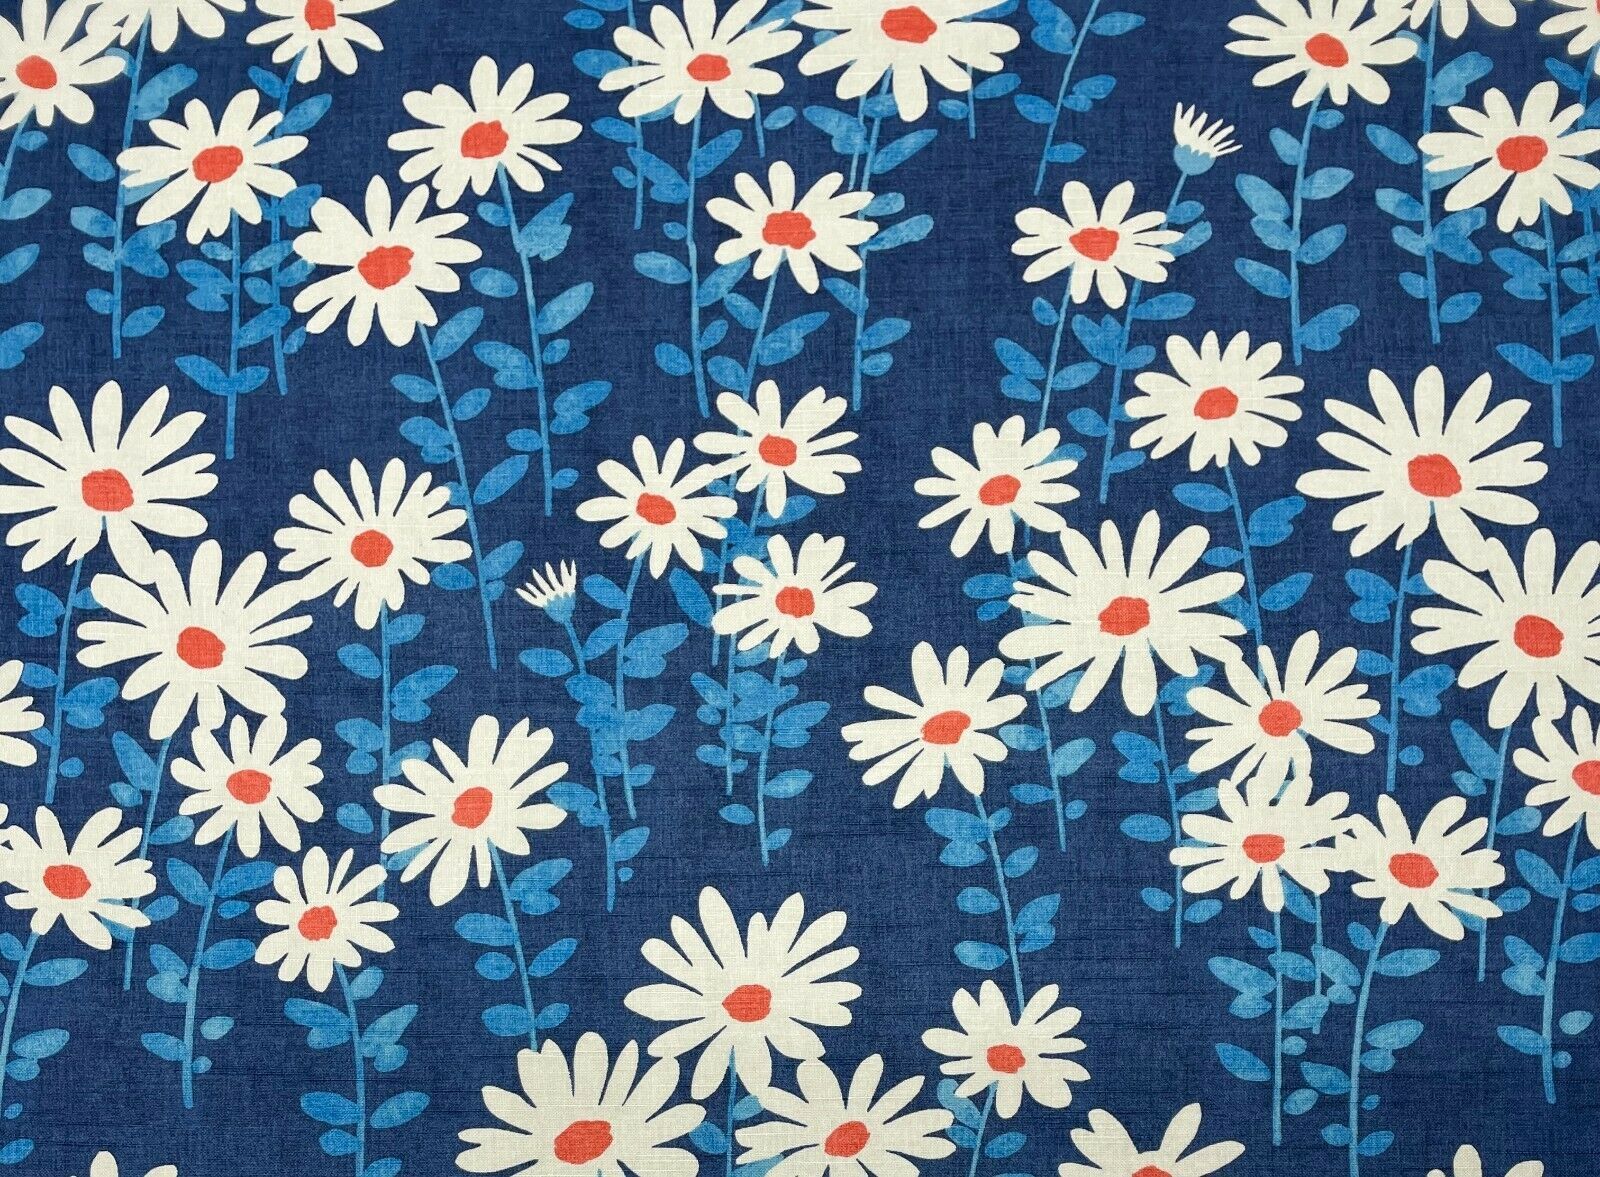 Primary image for NOVOGRATZ ENDLESS DAISIES BLUE MOOD FLORAL HIGH END MULTIUSE FABRIC BY YARD 54"W